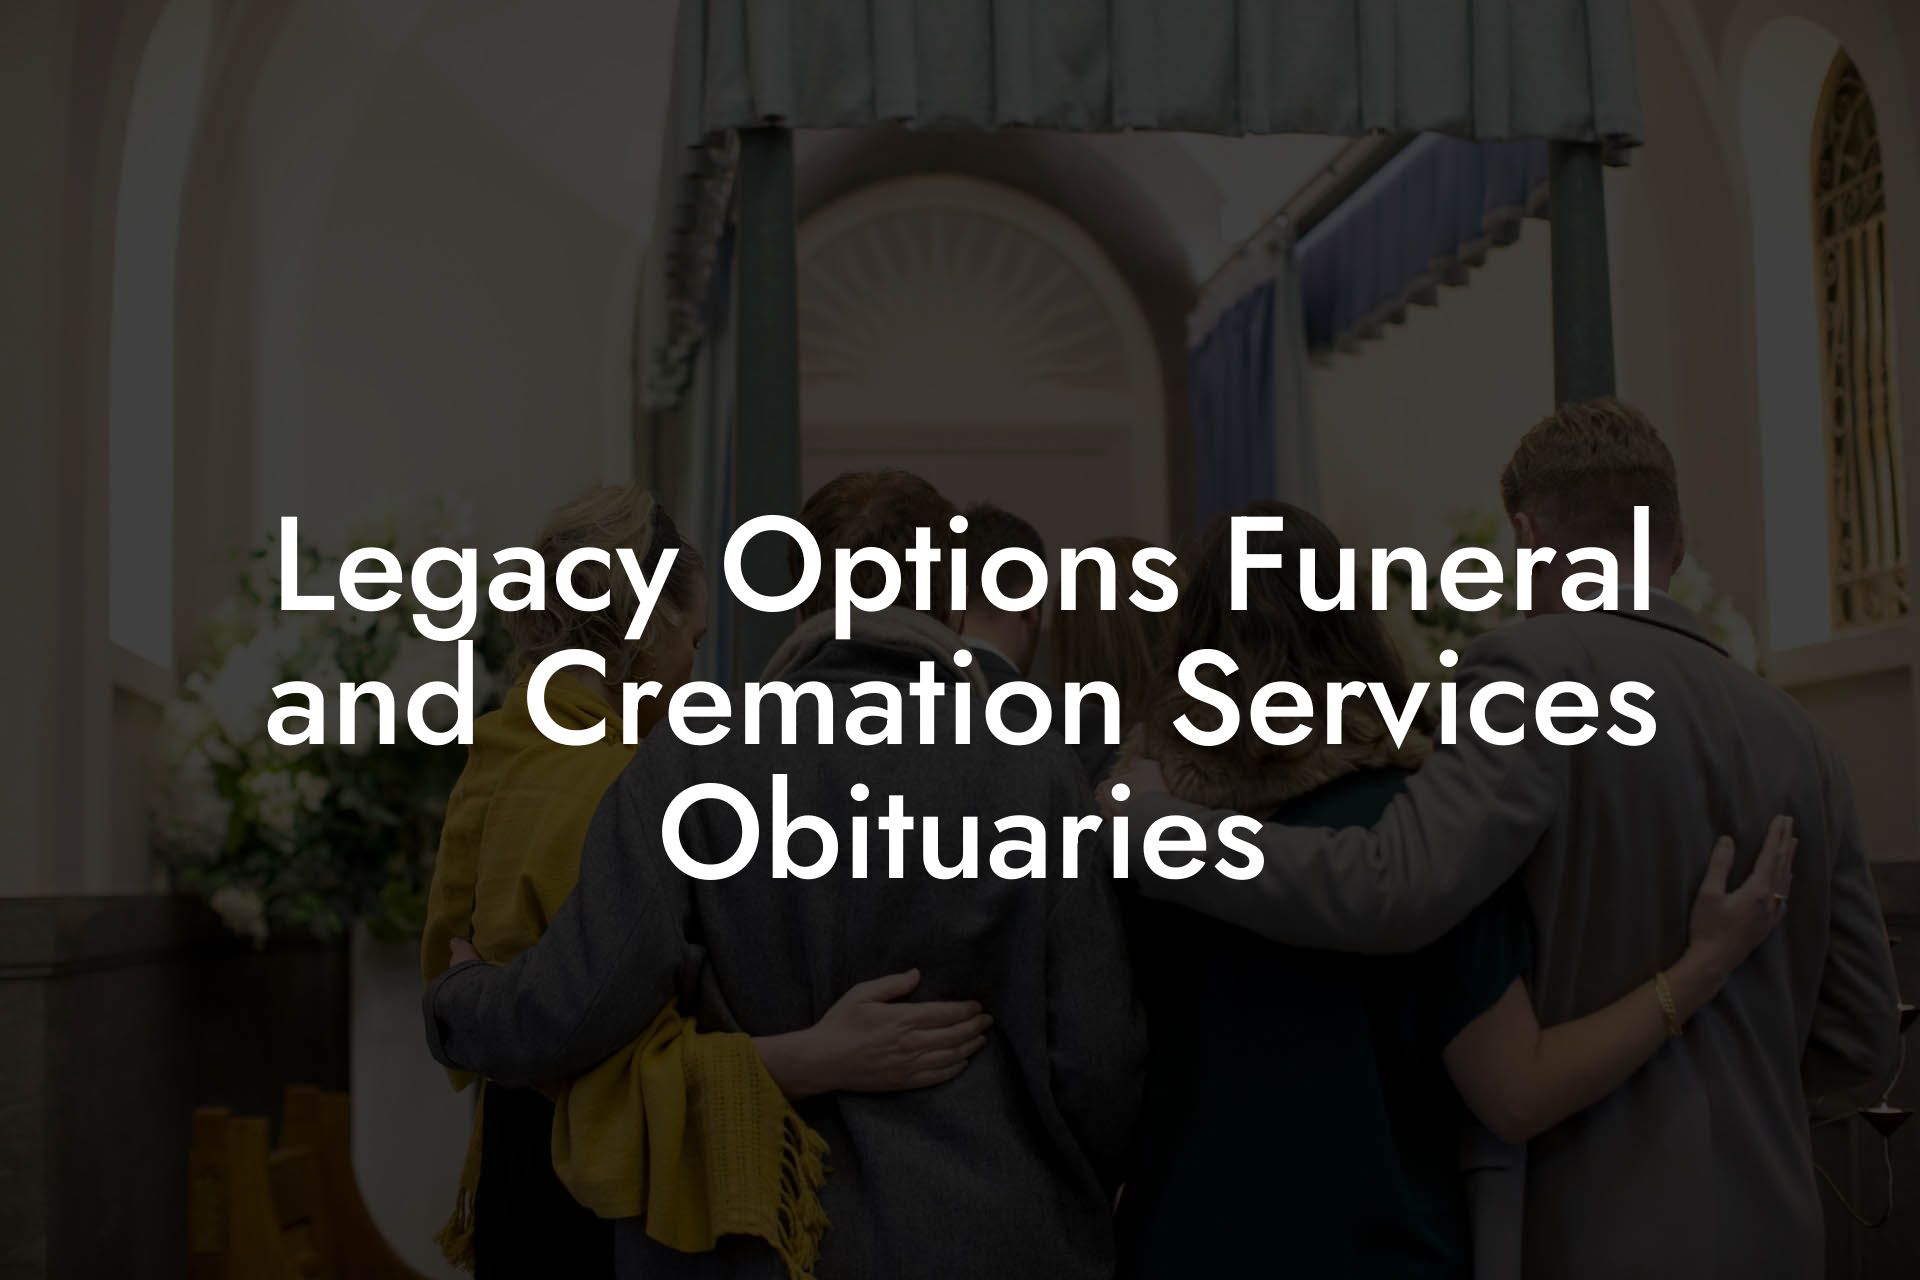 Legacy Options Funeral and Cremation Services Obituaries